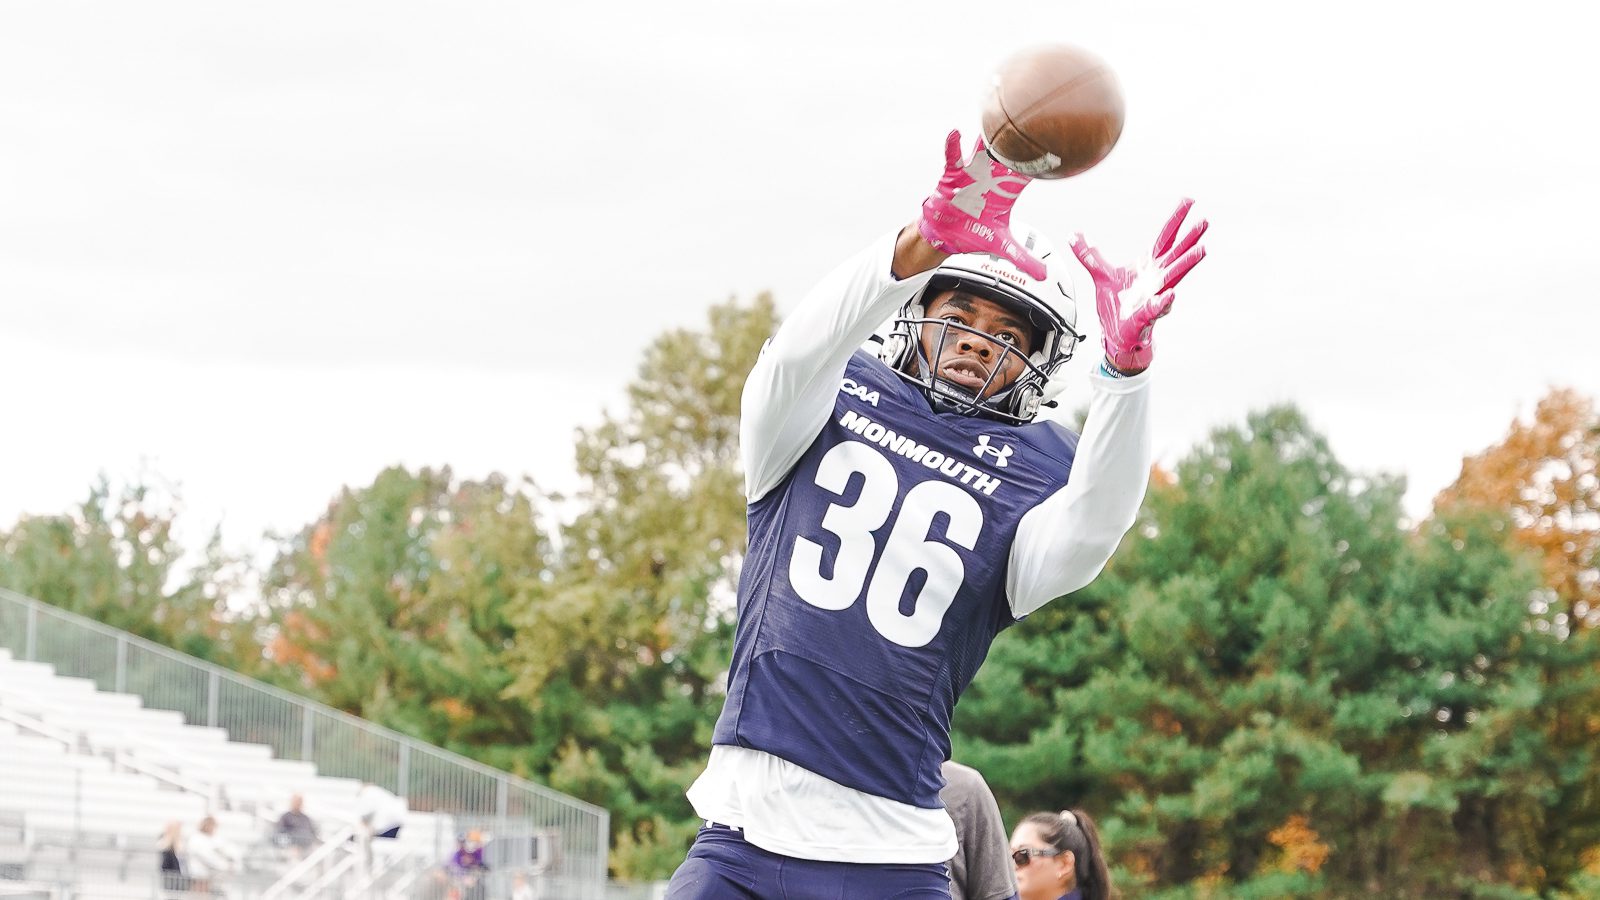 Andre (Dre) Tucker the versatile wide receiver from Monmouth recently sat down with Nick DiMeglio of Draft Diamonds.